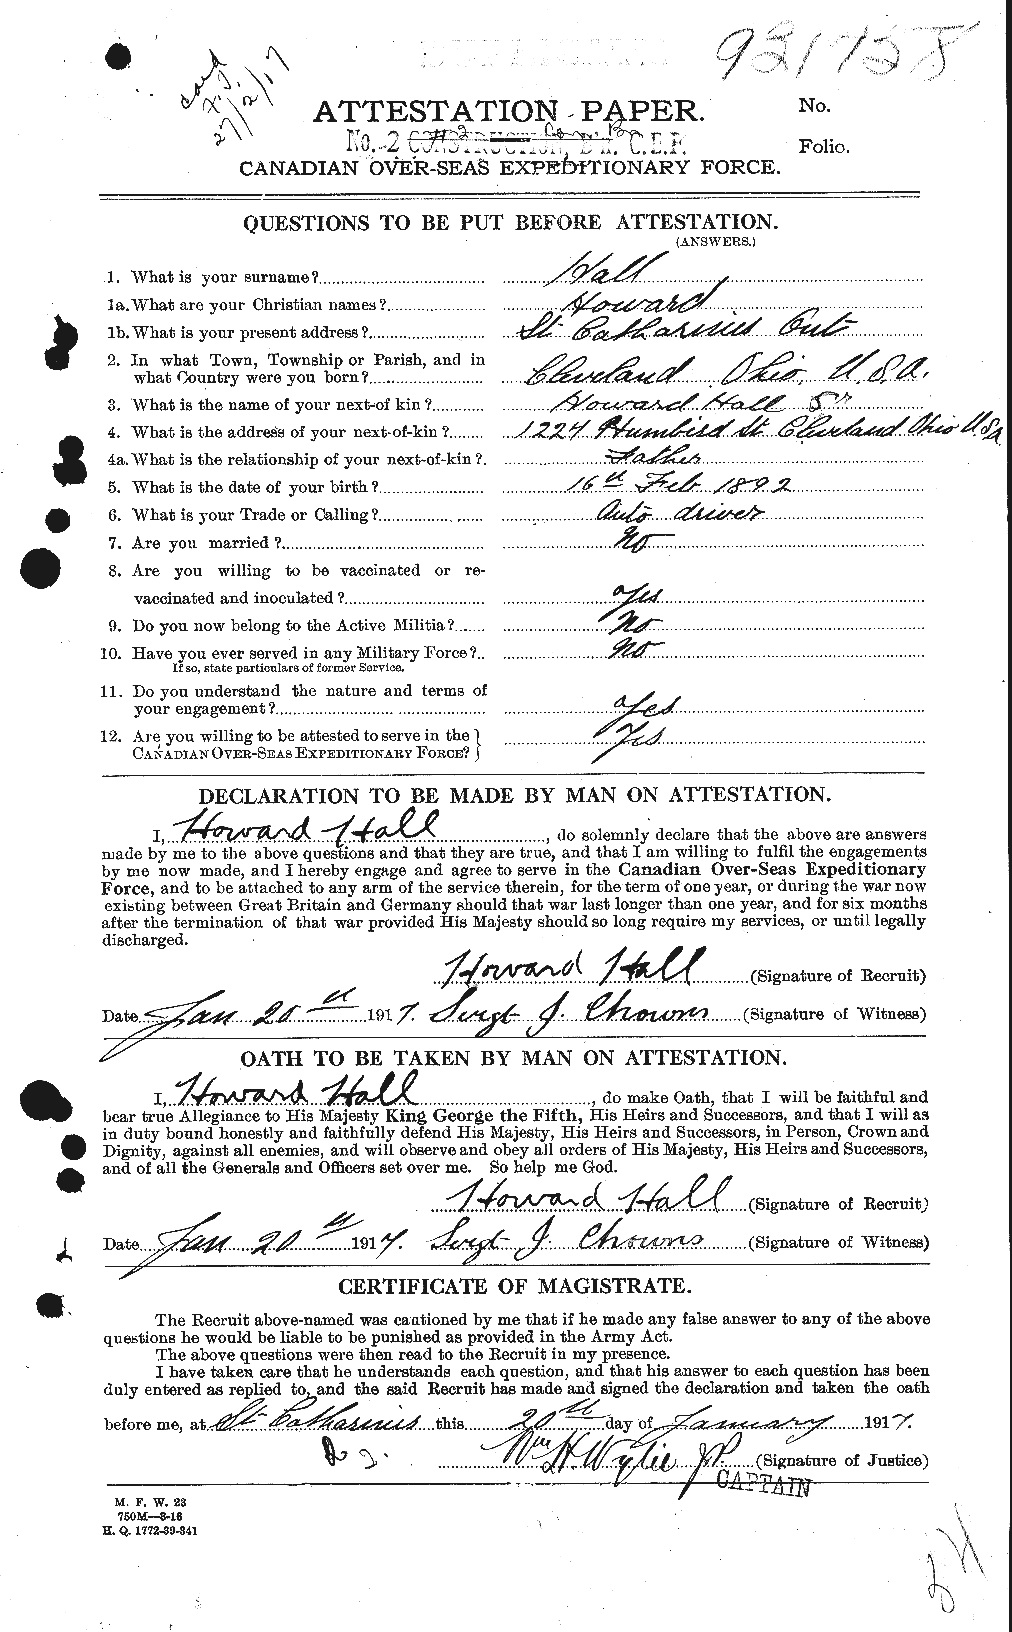 Personnel Records of the First World War - CEF 374154a